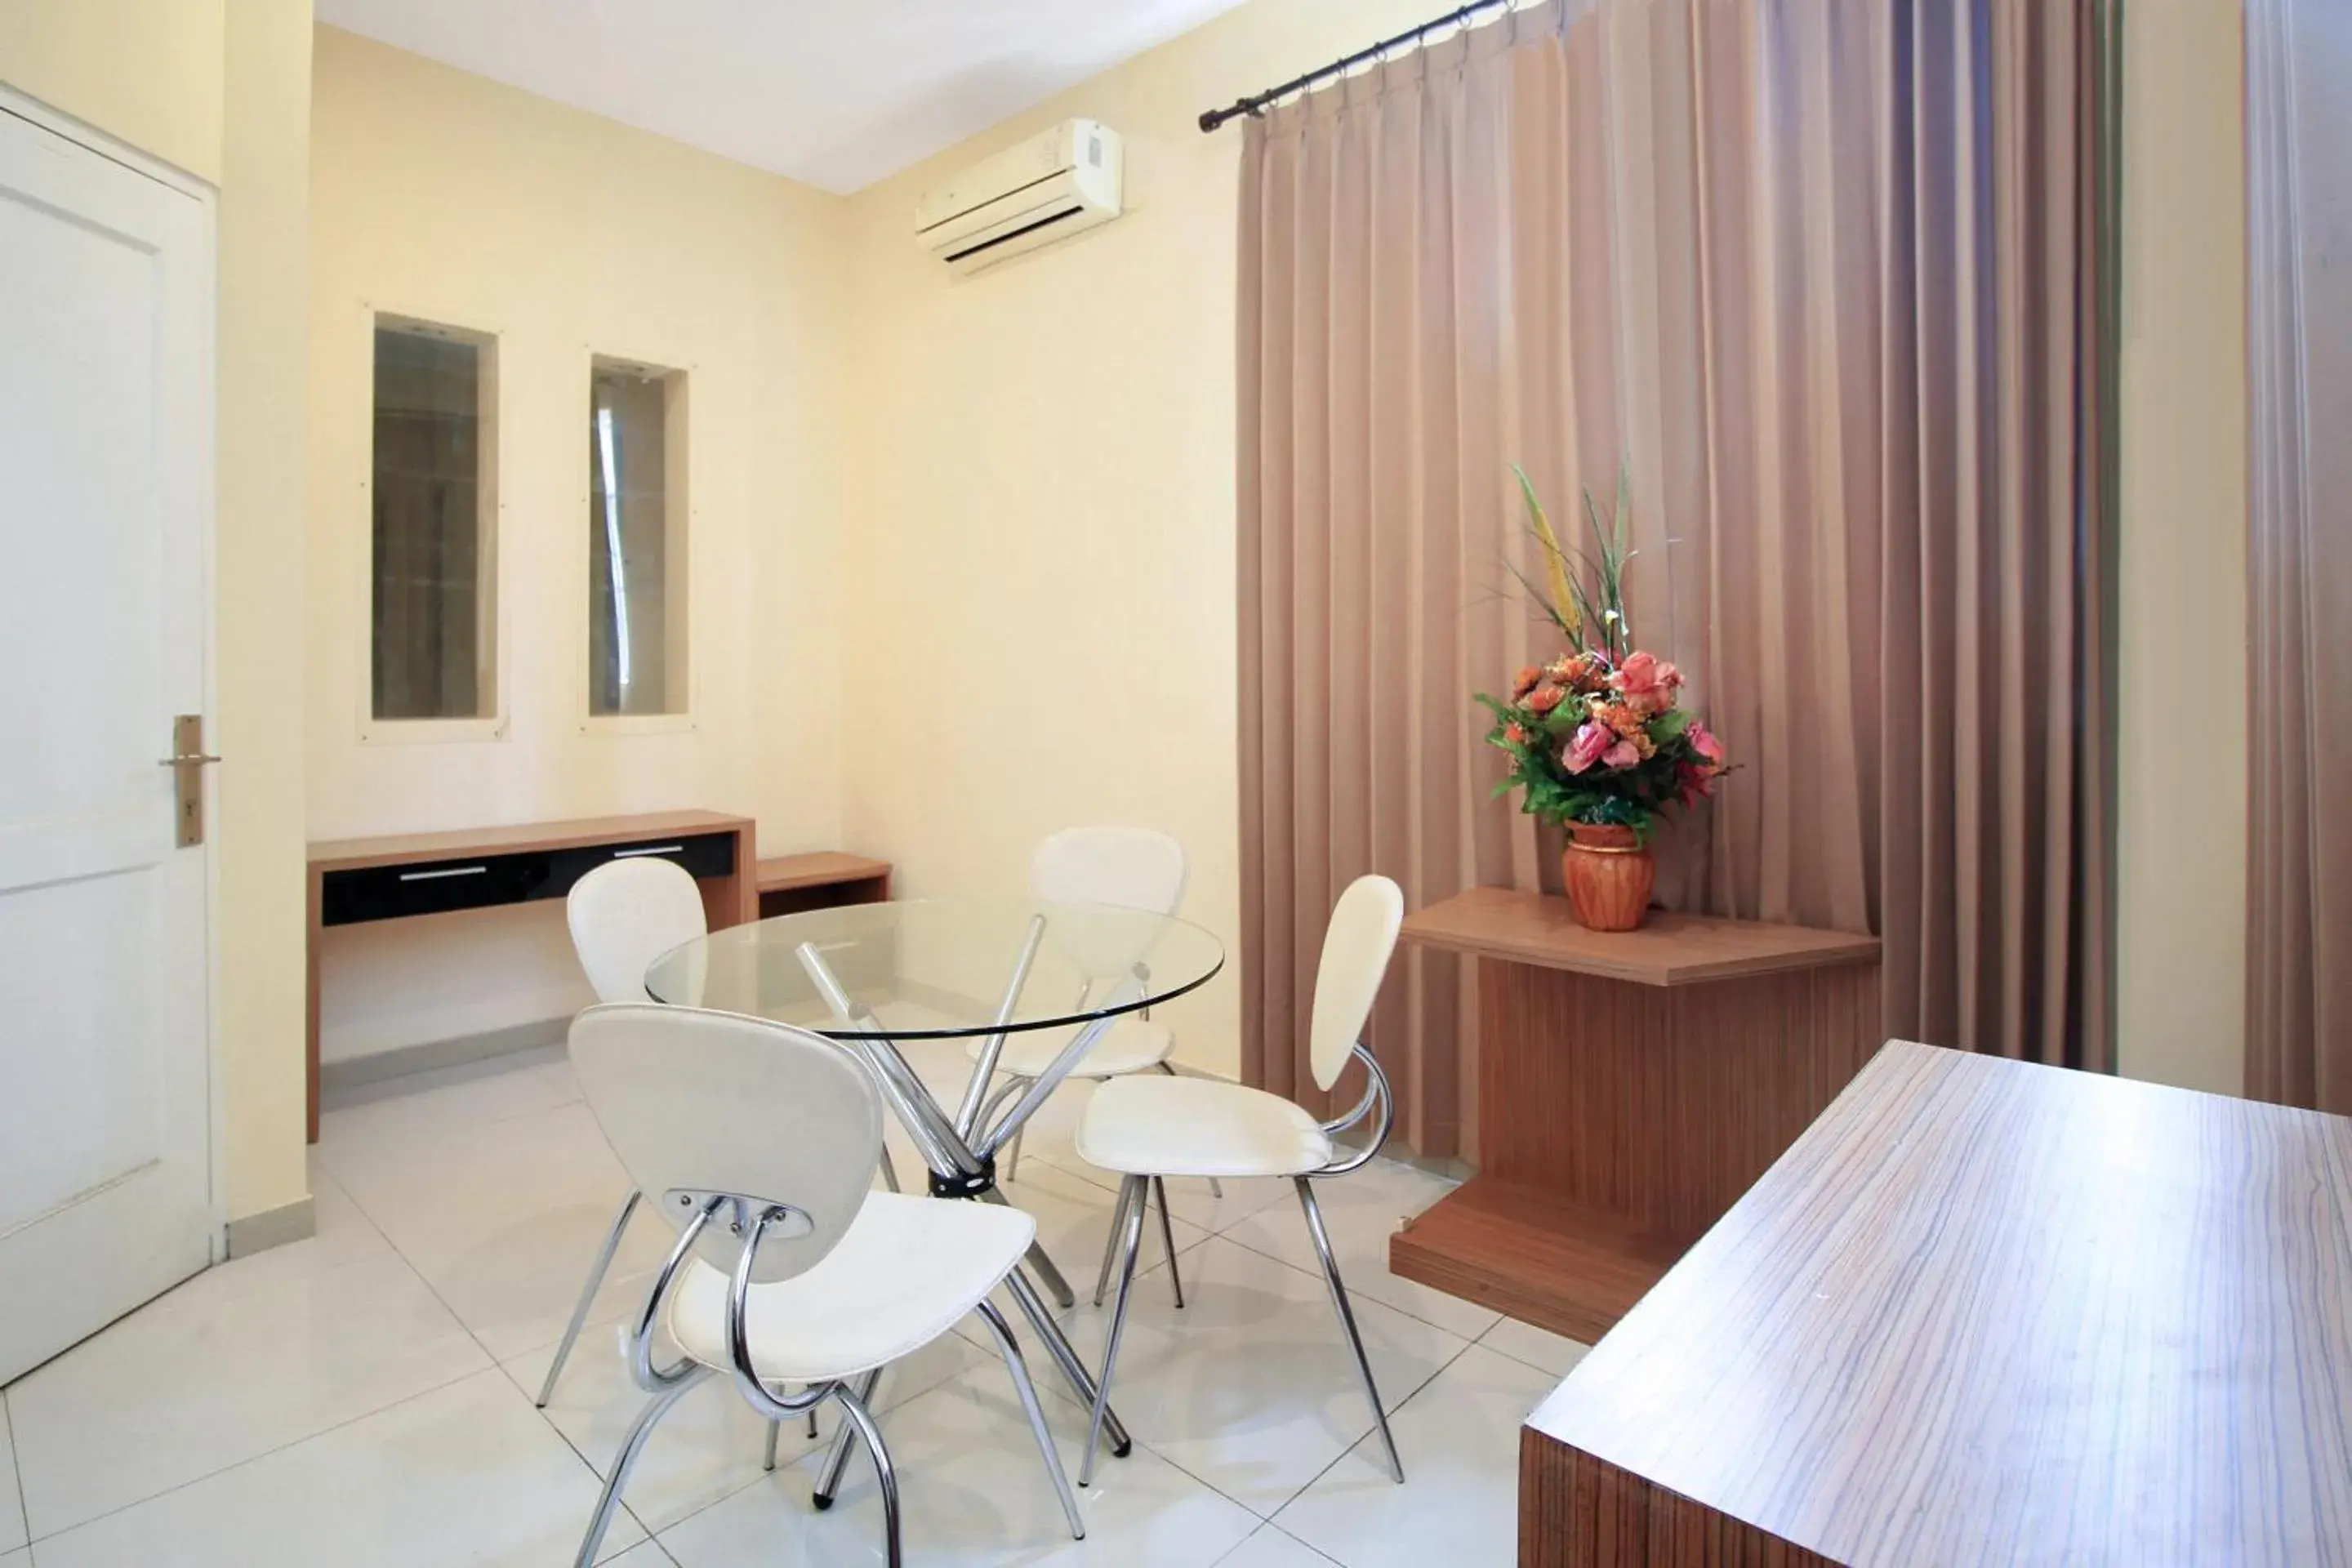 Area and facilities in OYO 175 K-60 Residence